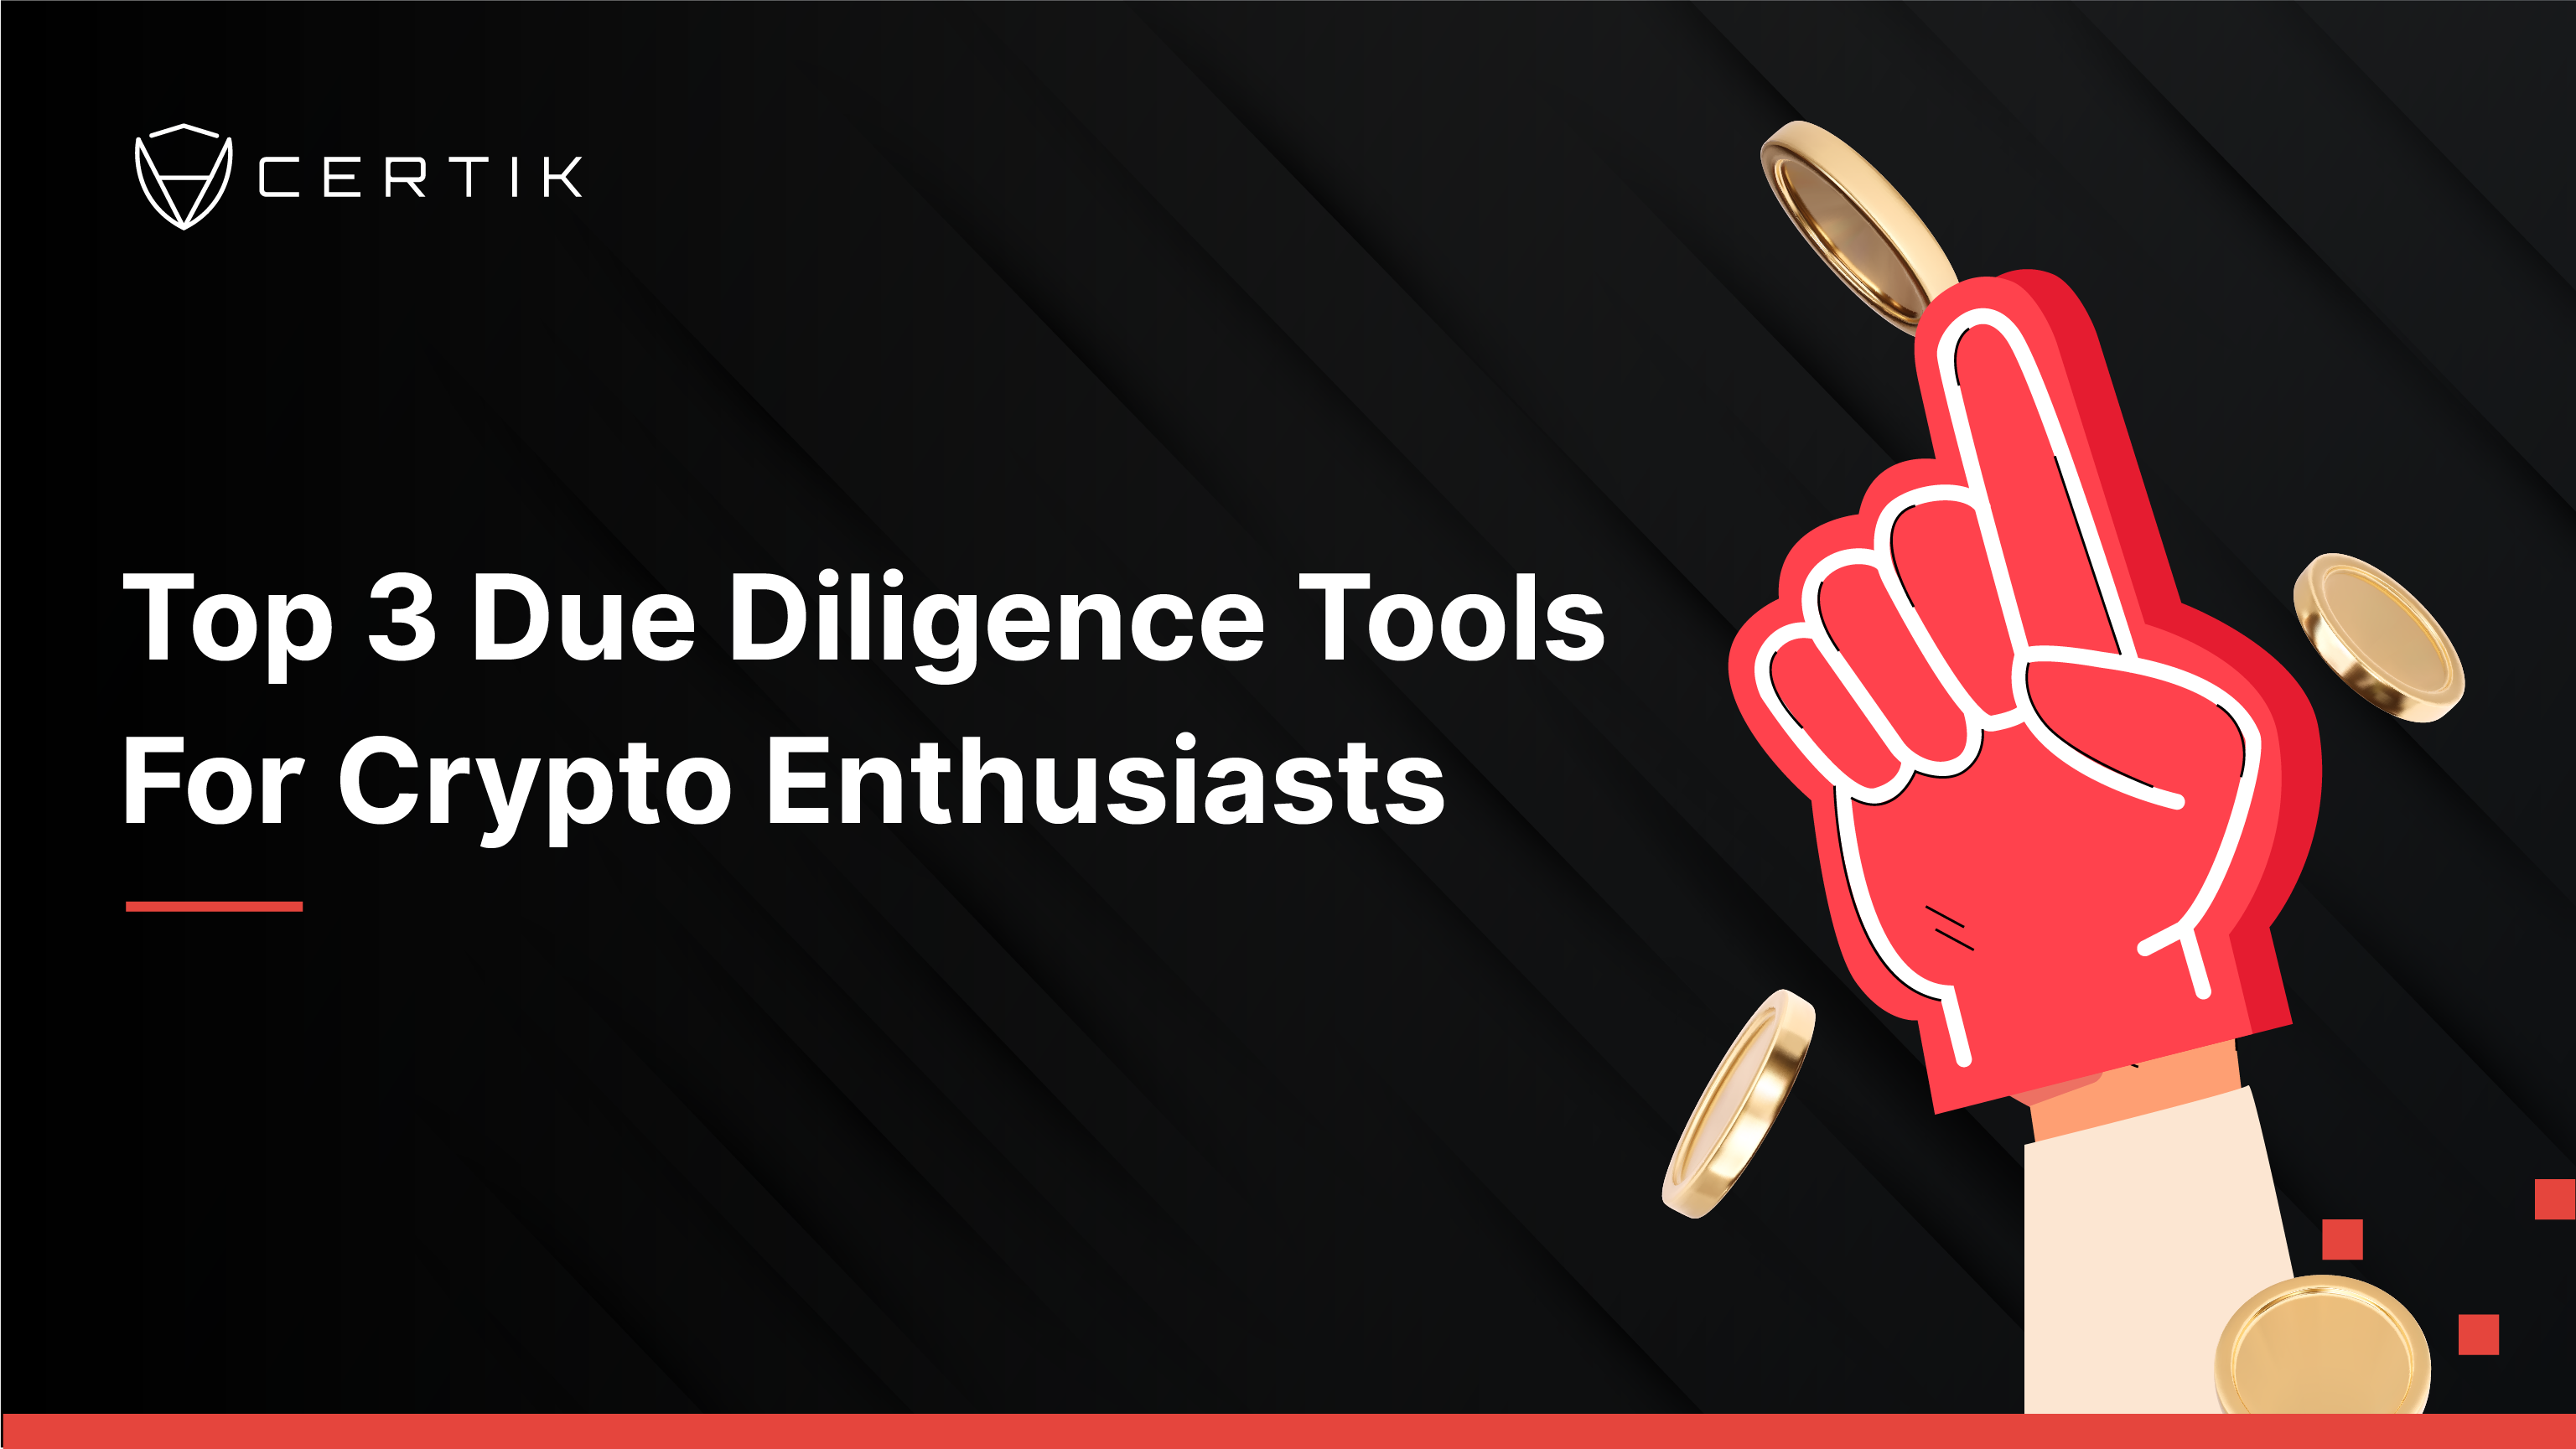 Top 3 Due Diligence Tools for Crypto Enthusiasts